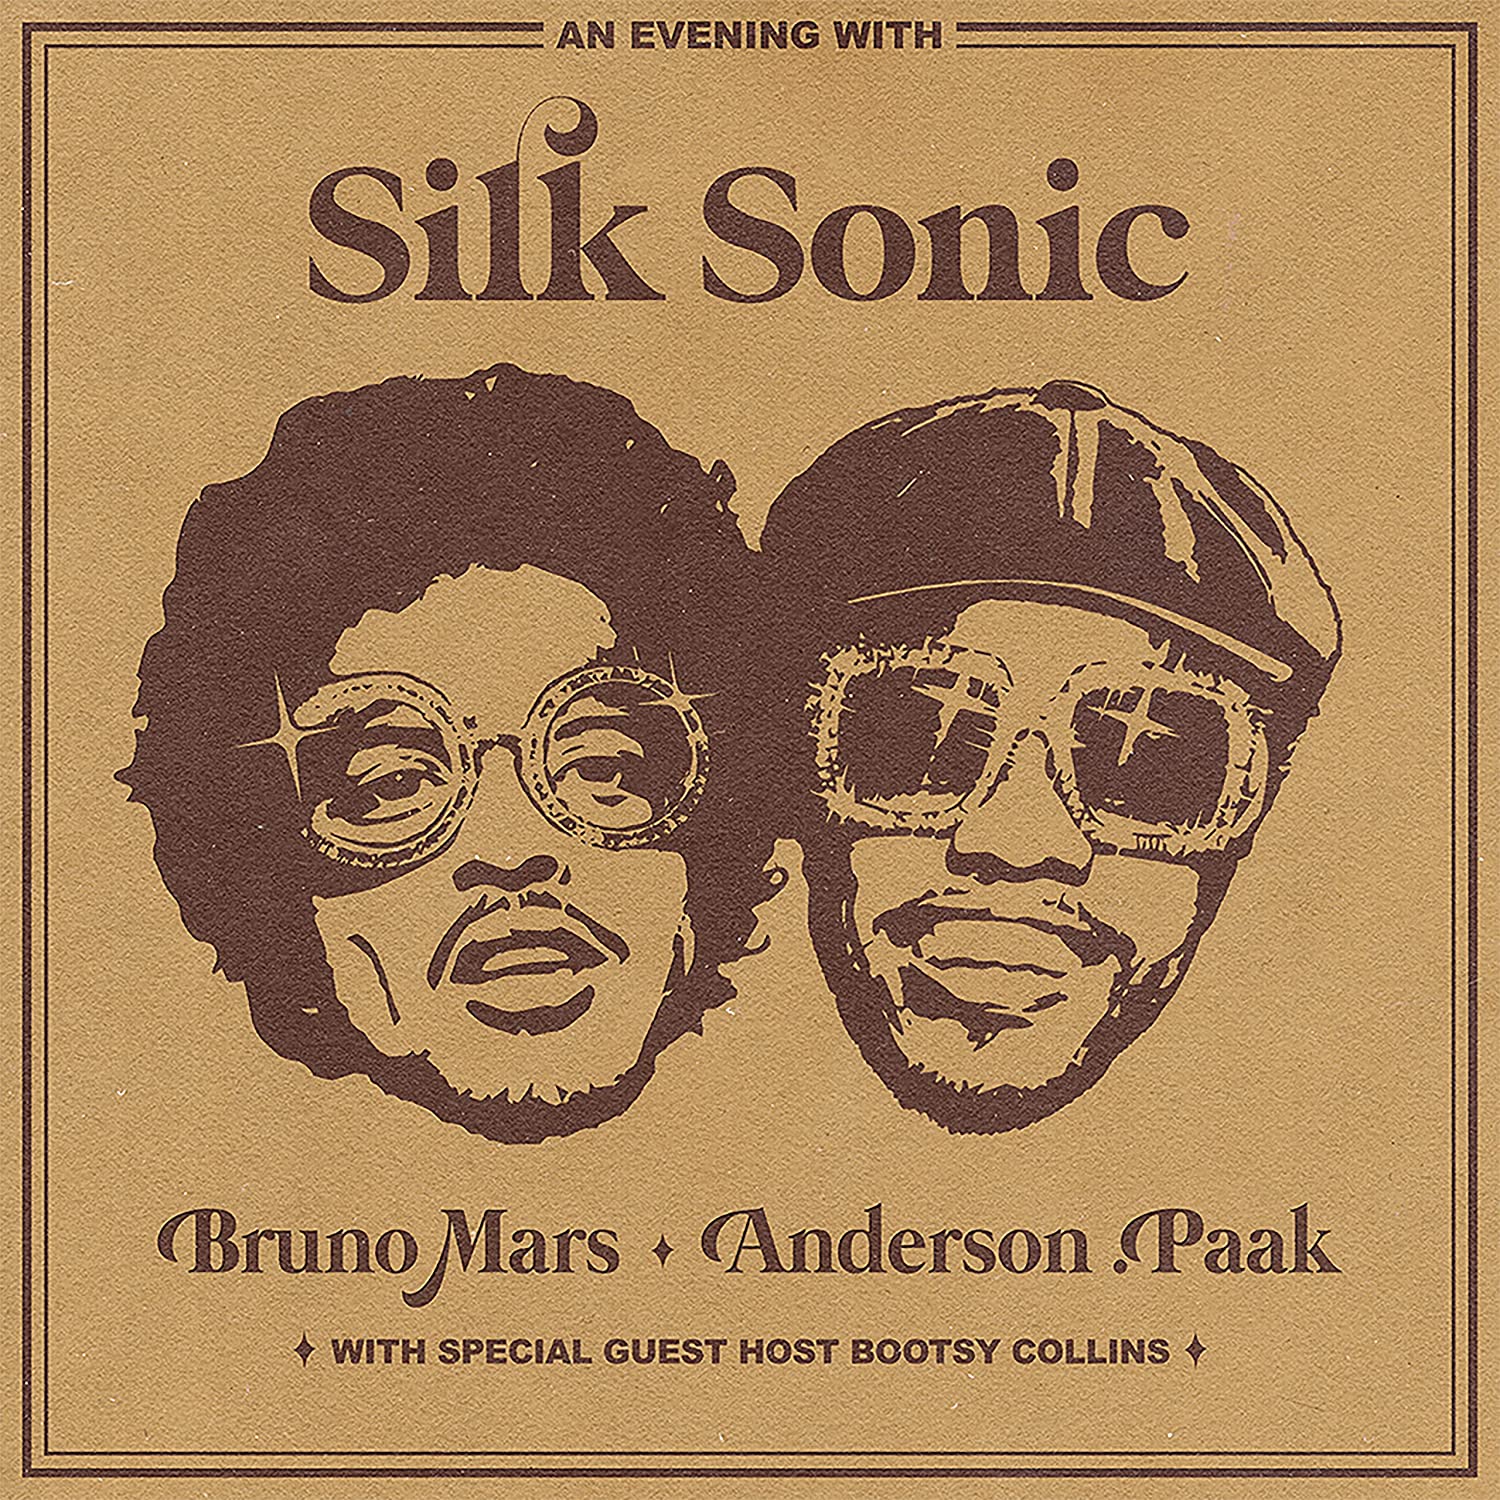 Album cover for Silk Sonic's "An Evening With Silk Sonic."